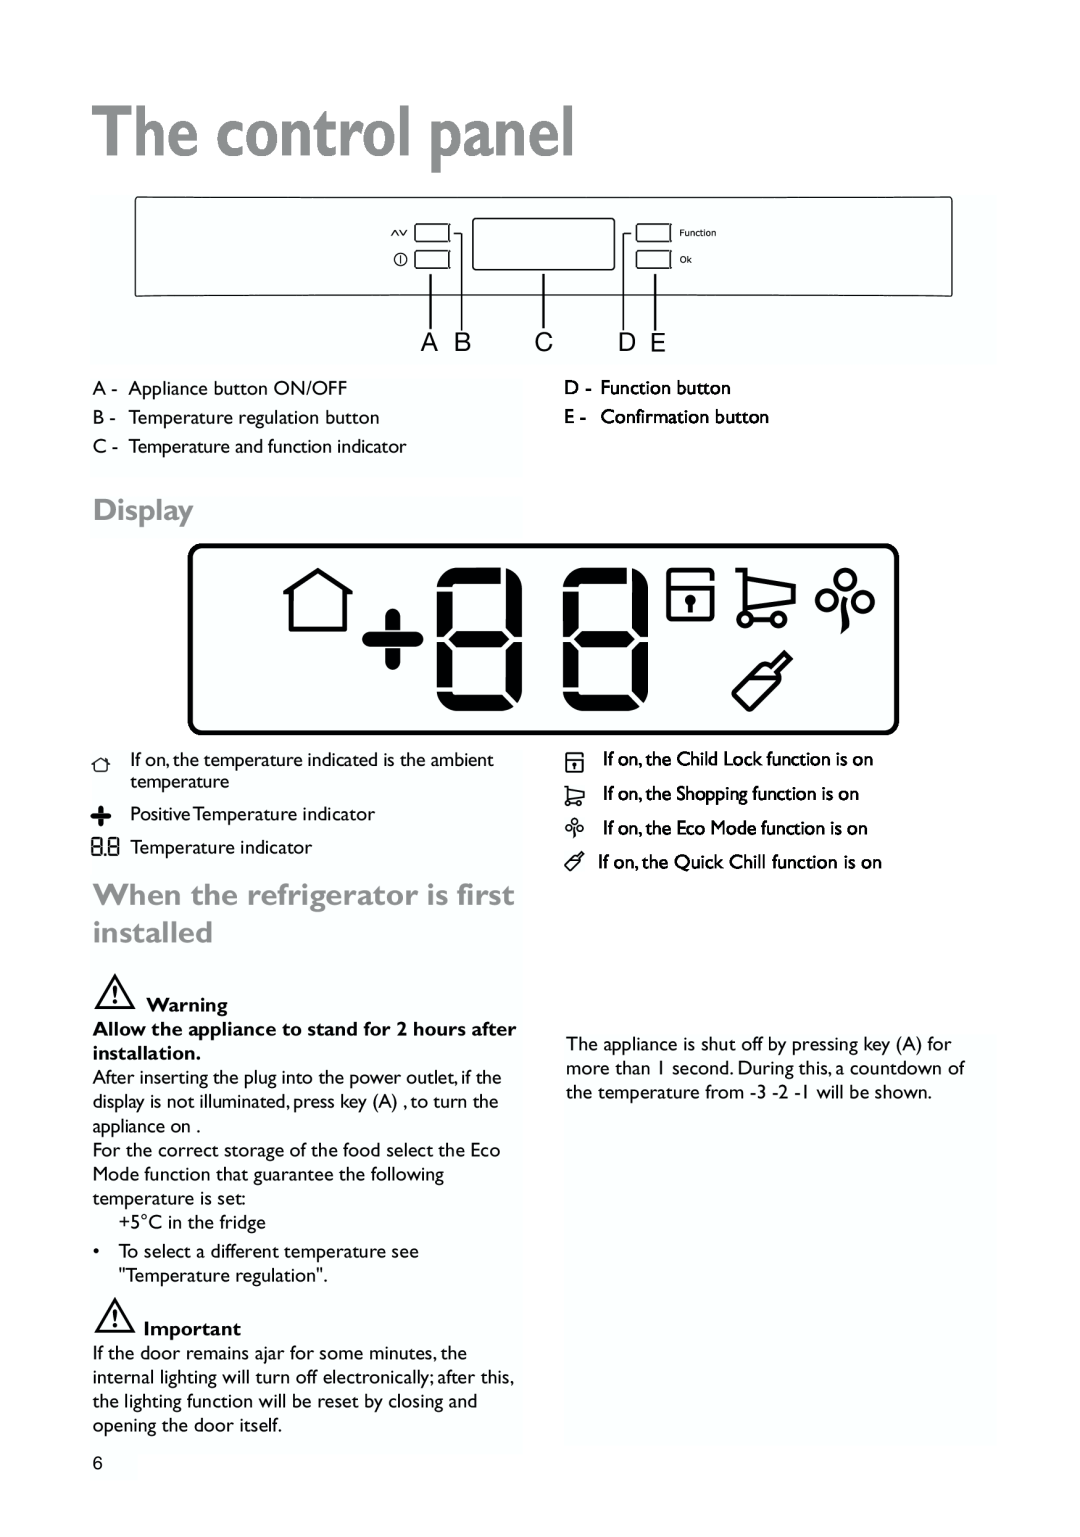 John Lewis JLLFW1809 instruction manual The control panel, Display, When the refrigerator is first installed 